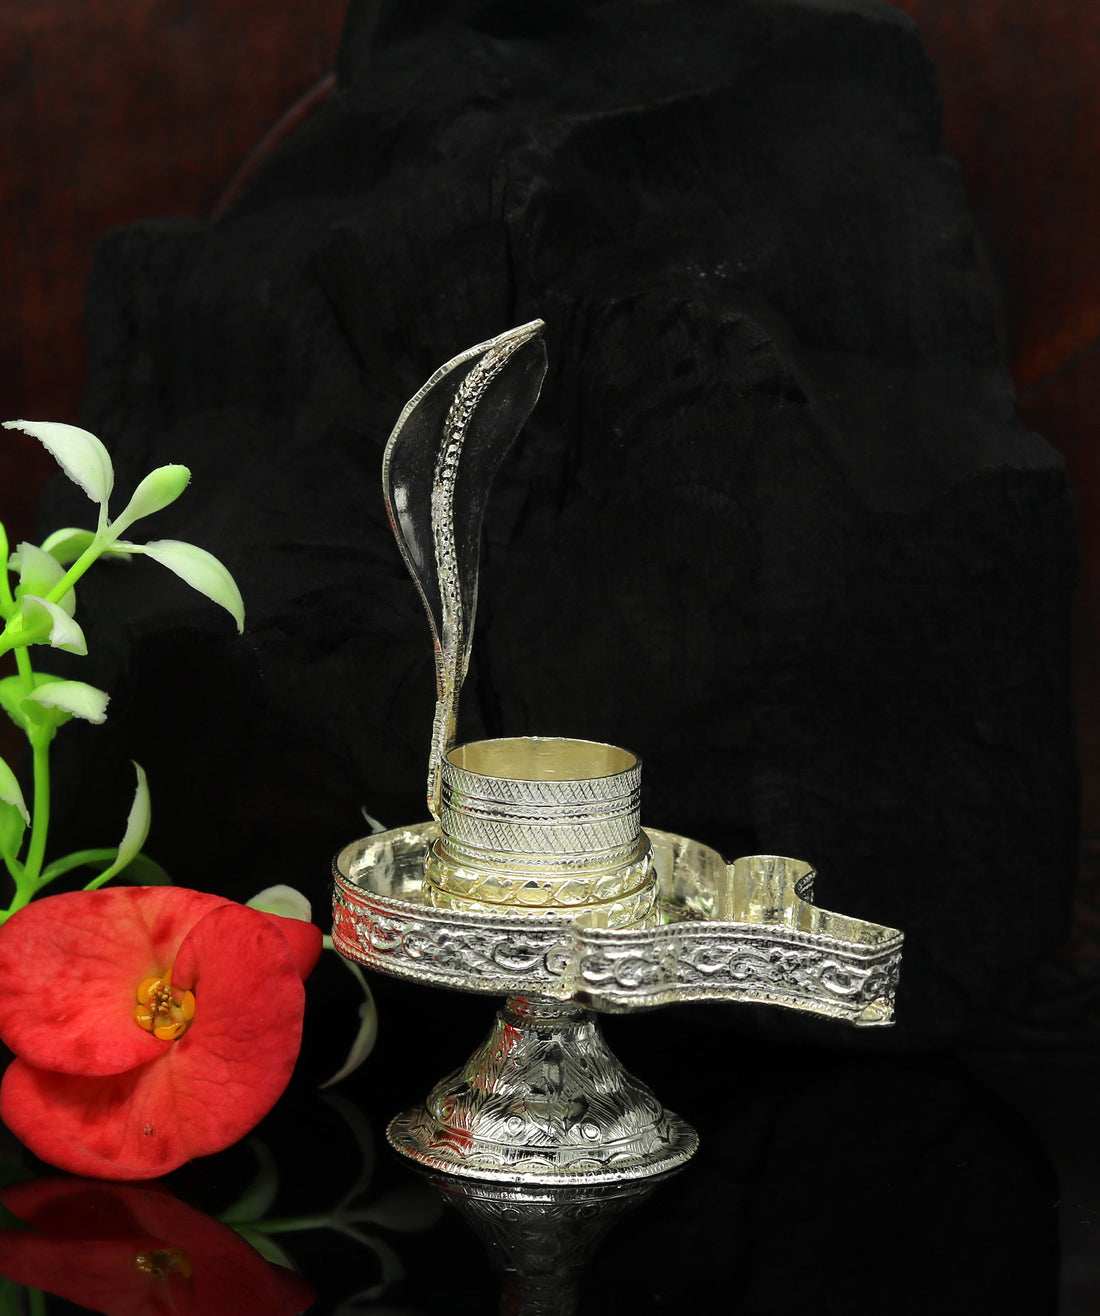 925 sterling silver handmade Lord shiva-Linga Stand, silver utensils, silver puja temple art, mini shiva lingam stand with serpent su10 - TRIBAL ORNAMENTS